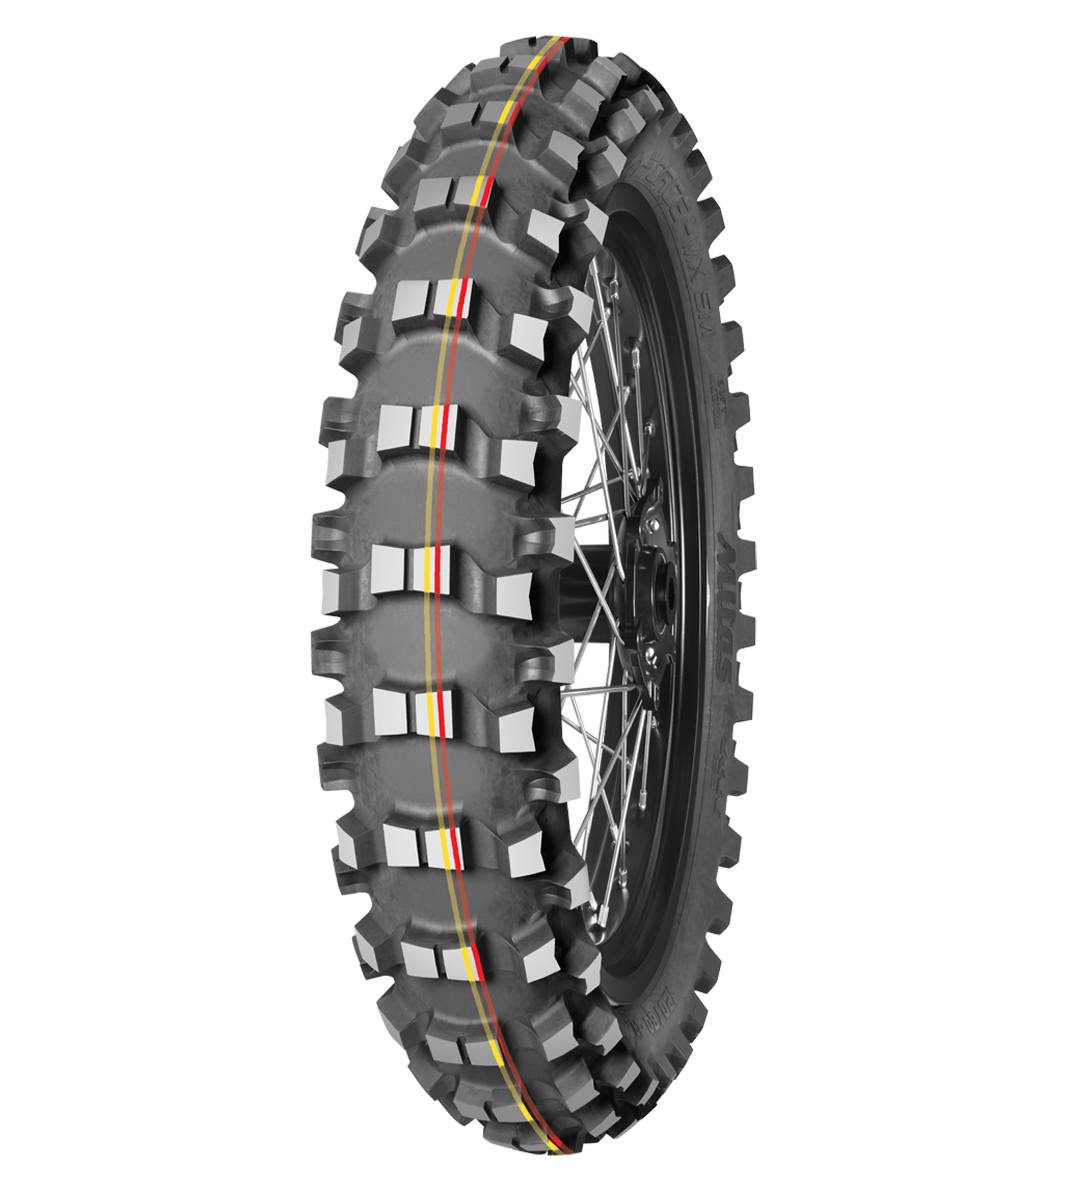 Mitas TERRA FORCE-MX SM 90/100-14 Motocross Competition Off-Road SOFT TO MEDIUM 49M Red & Yellow Tube Rear Tire, 226032, 90/100-14, Motocross, Motocross Competition, Off-Road, Rear, Terra Force, Terra Force-MX SM, Trail, Tires - Imported and distributed in North & South America by Lindeco Genuine Powersports - Premier Powersports Equipment and Accessories for Motorcycle Enthusiasts, Professional Riders and Dealers.